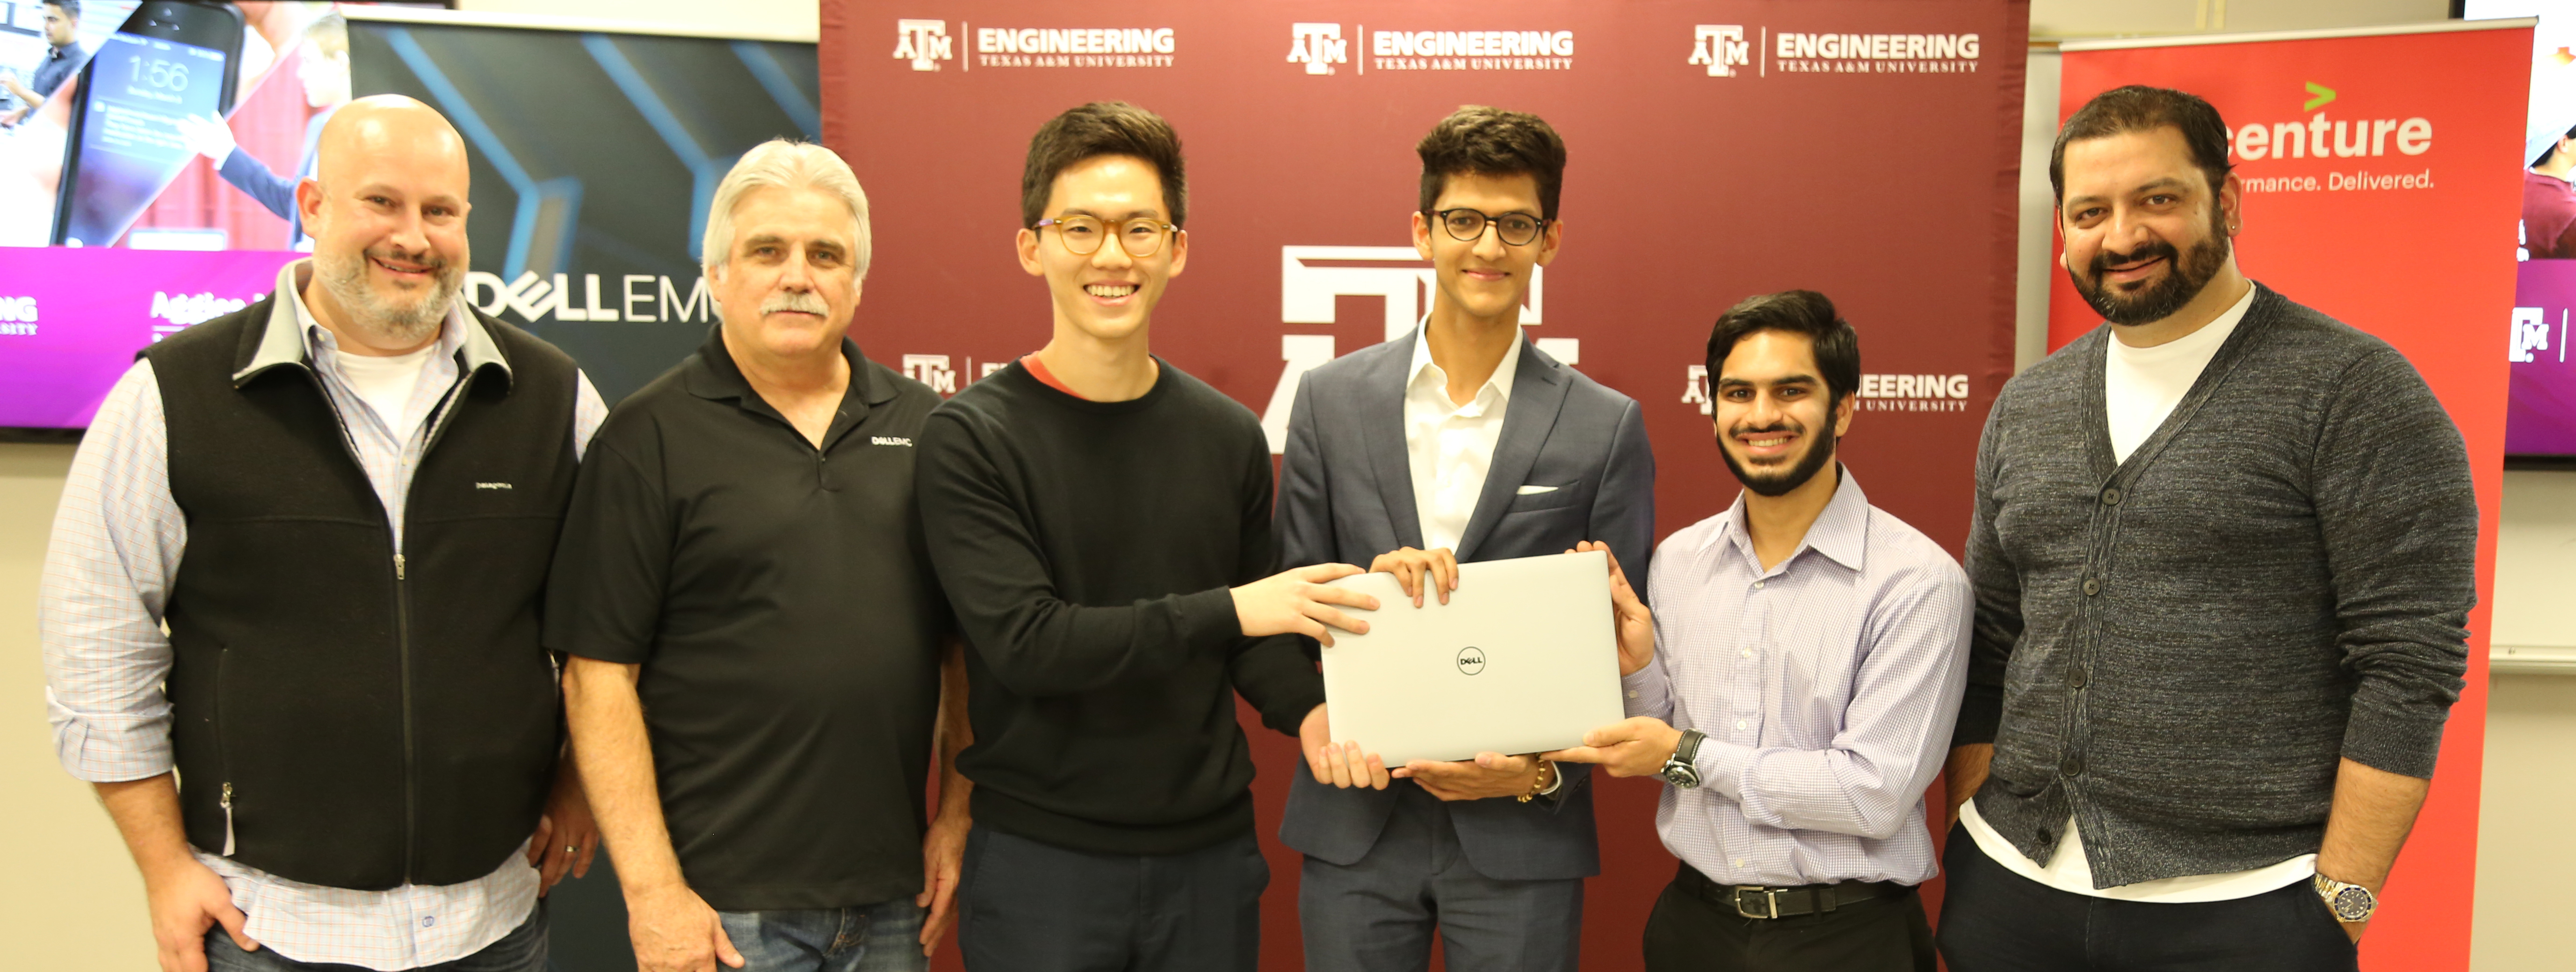 Six men (three are students holding a Dell laptop in front of them) standing in front of wall with maroon stand with the College of Engineering logo on it, a fast screen television to the left and another standing sign on the right that is red. Words are covered by man standing in front of it.